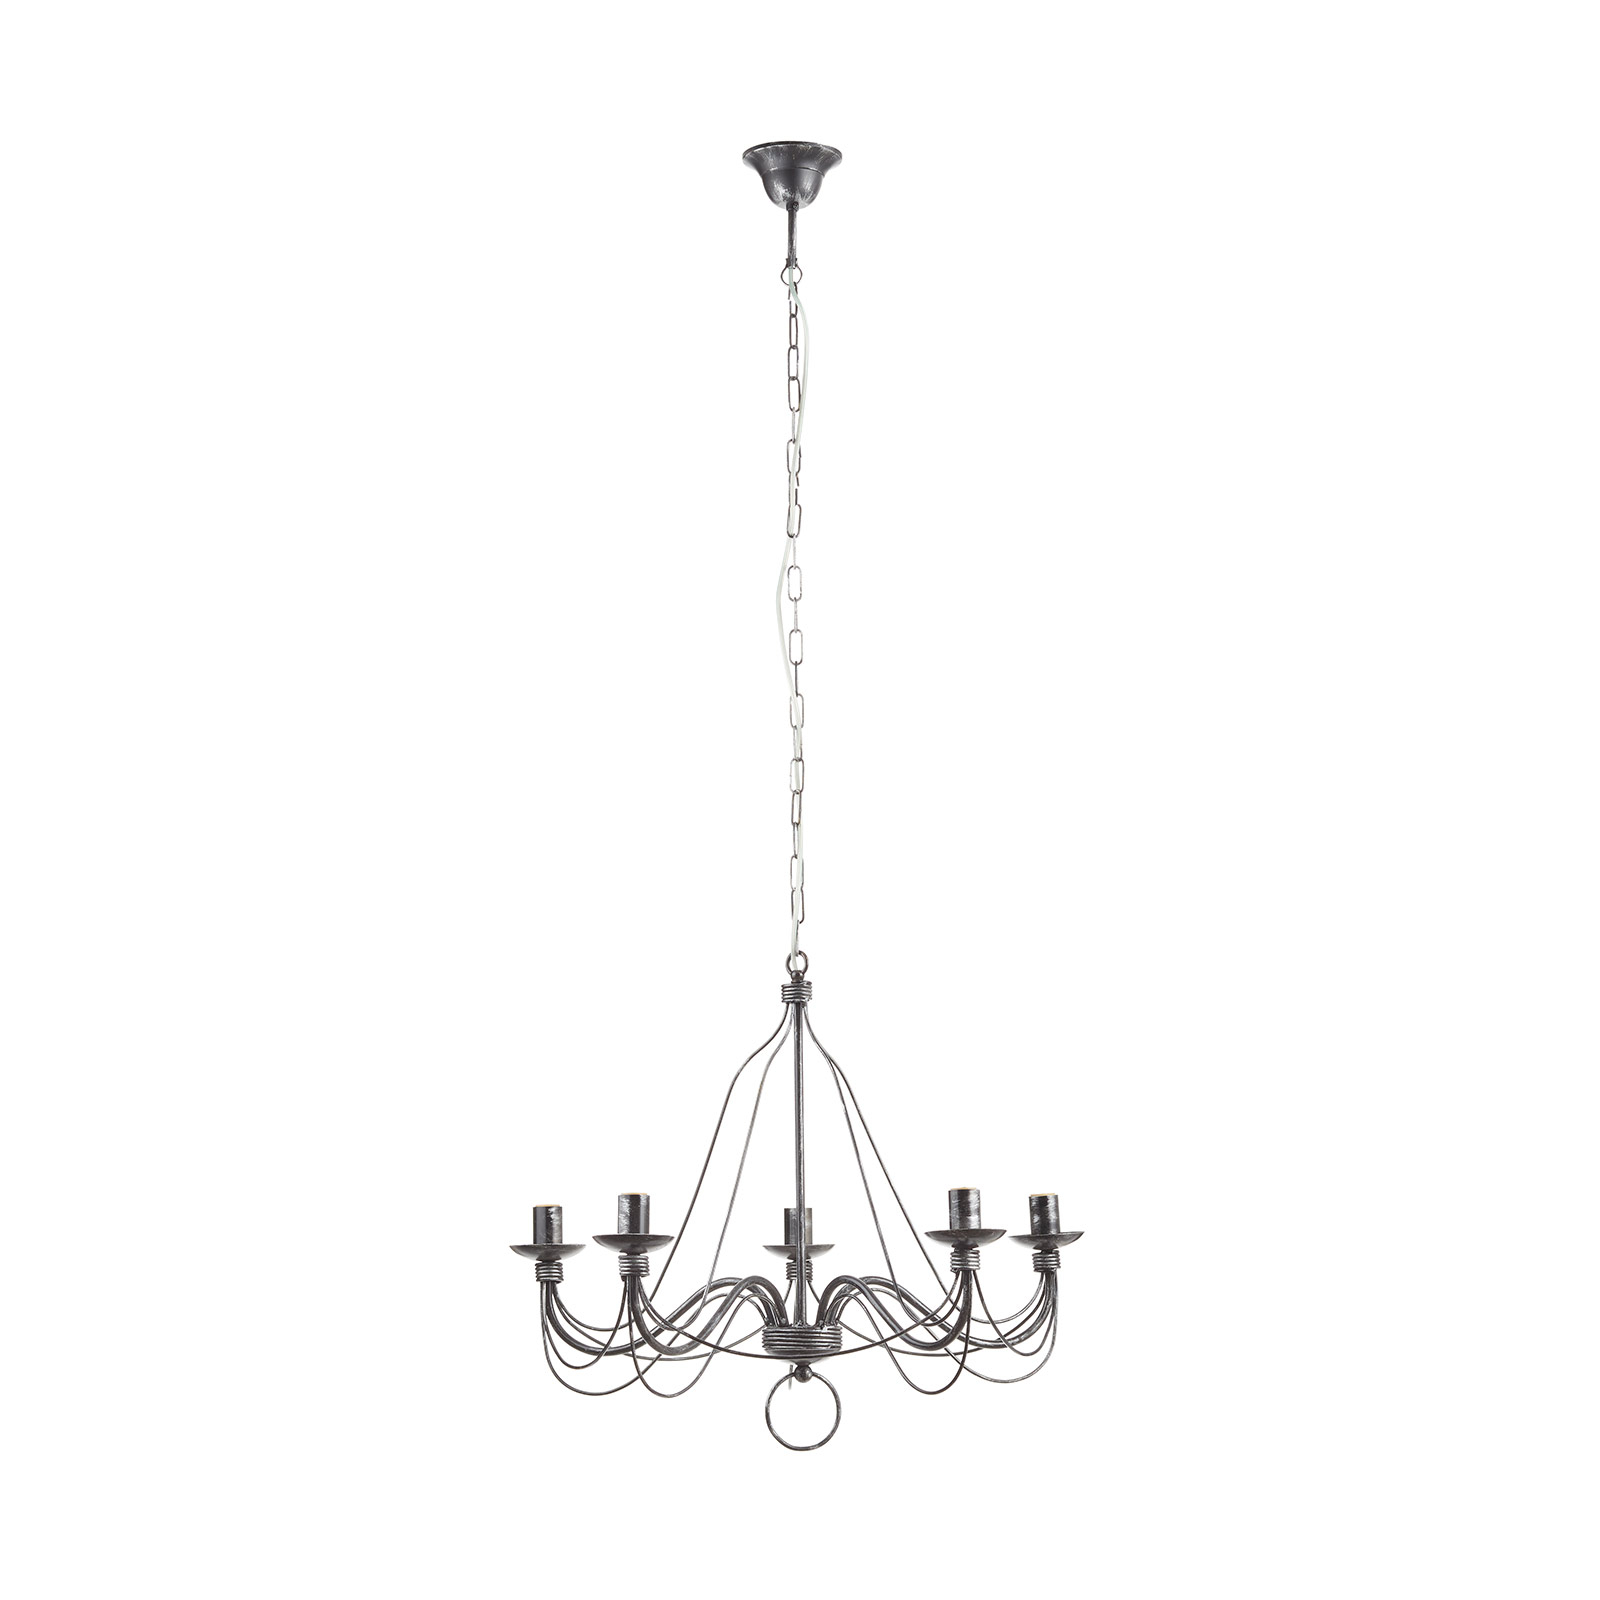 007/5 L chandelier, 5-bulb, black and silver